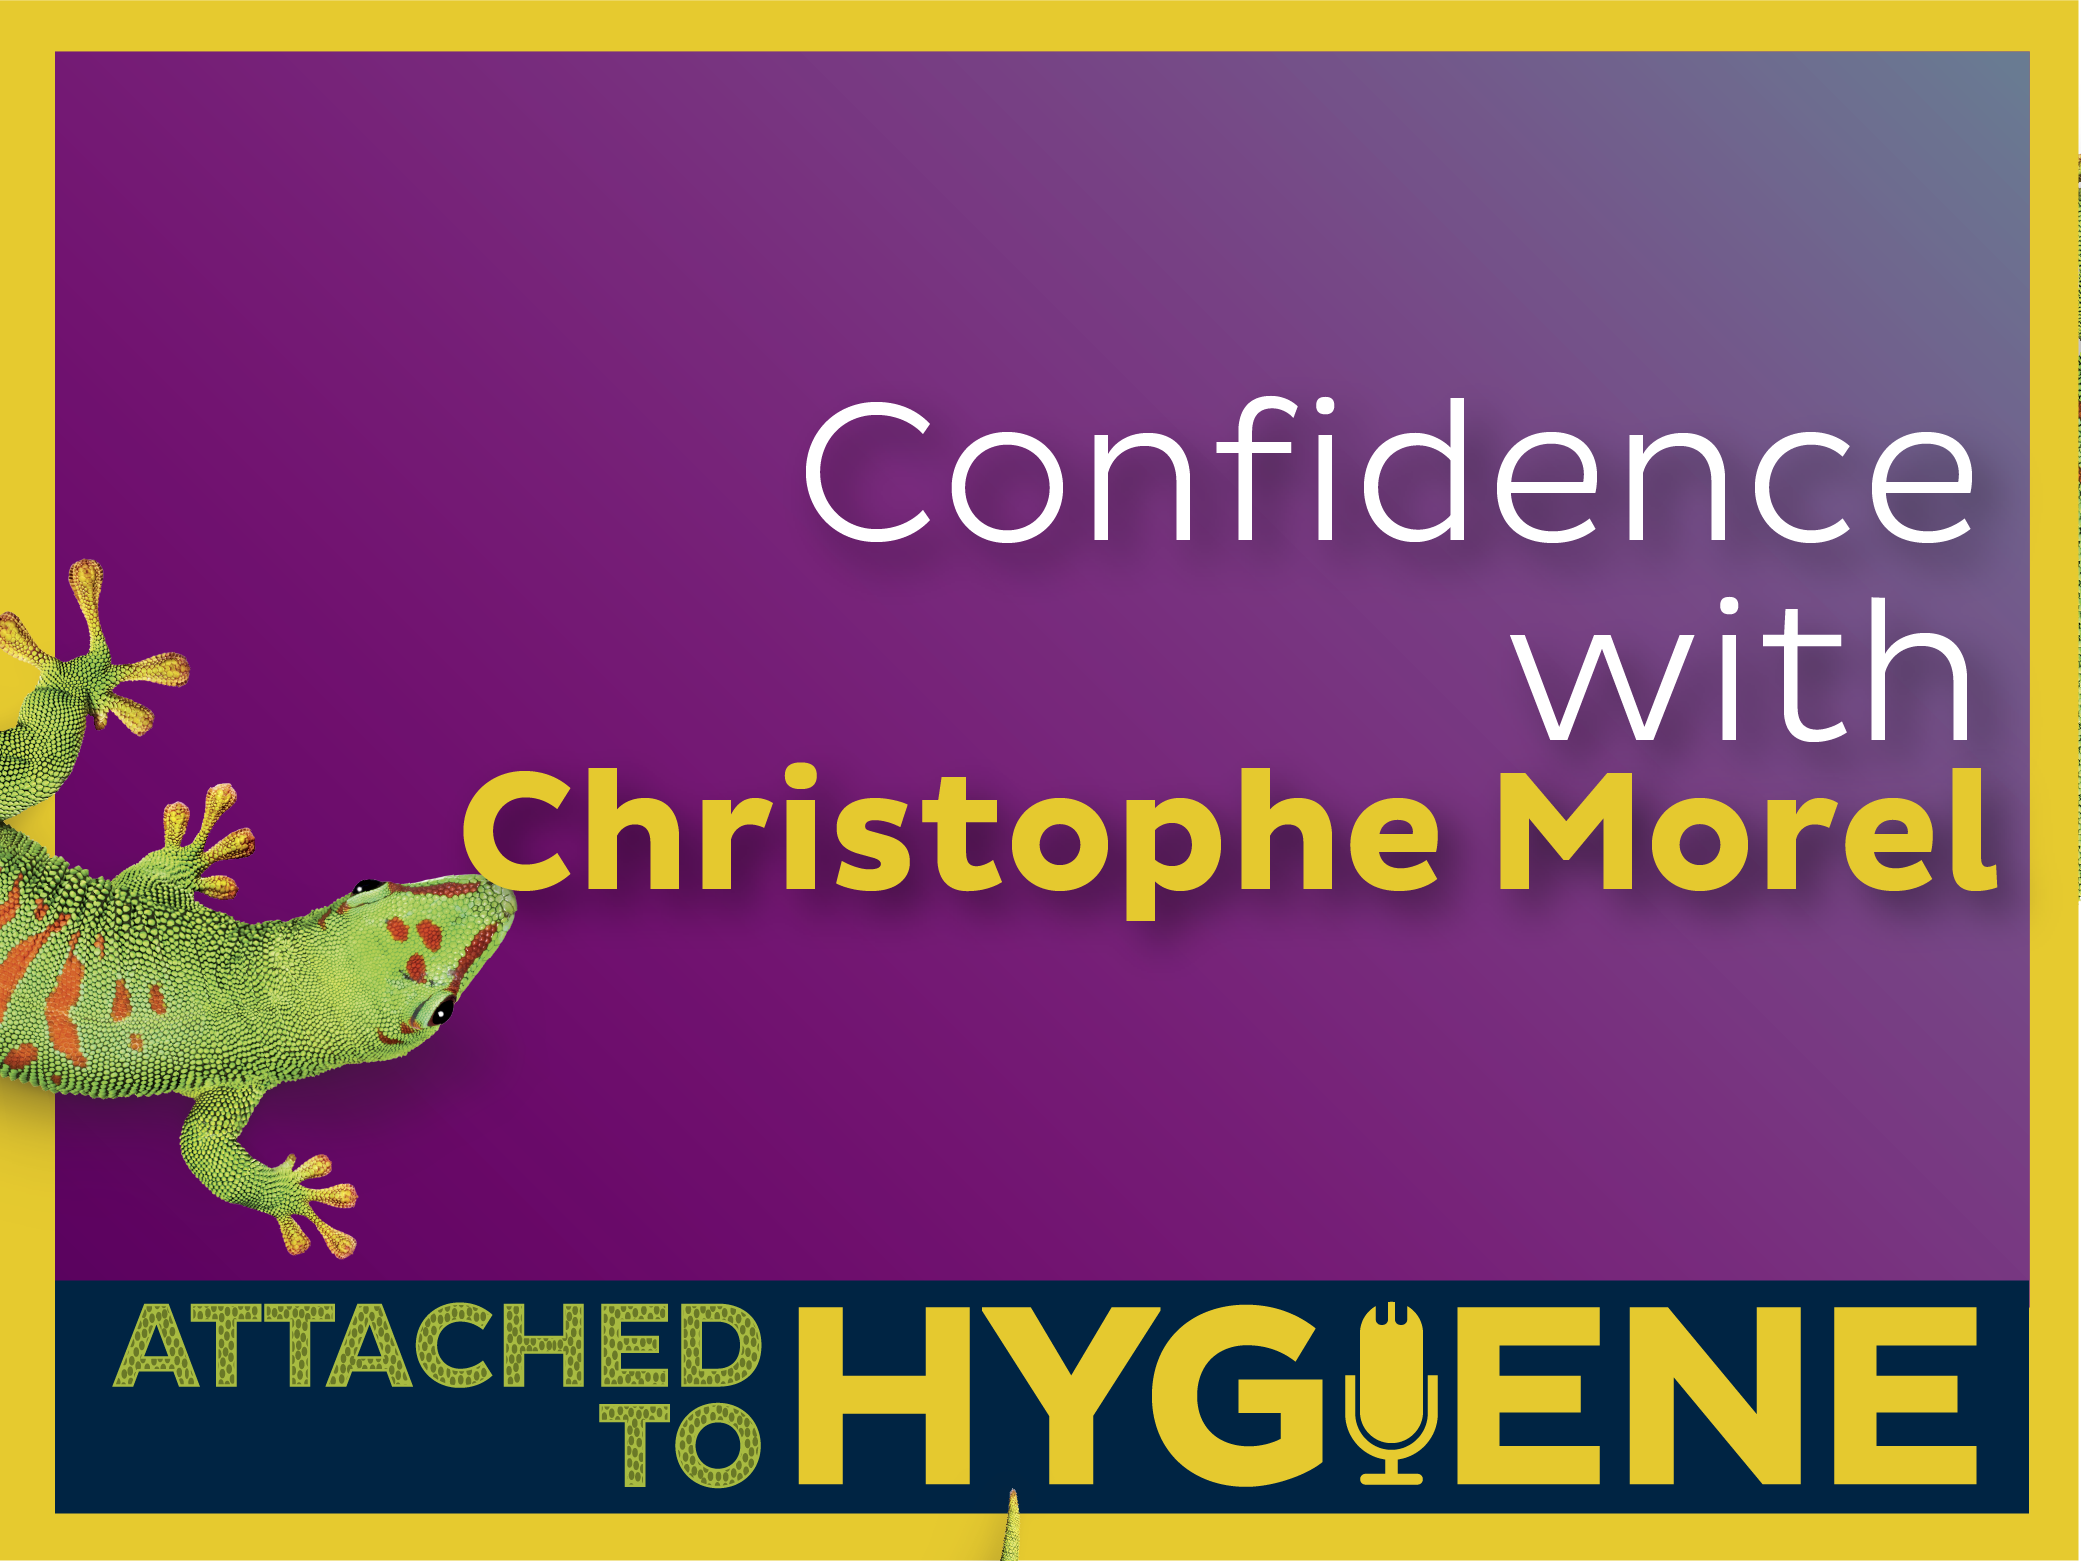 Confidence-with-Christophe-Morel-2